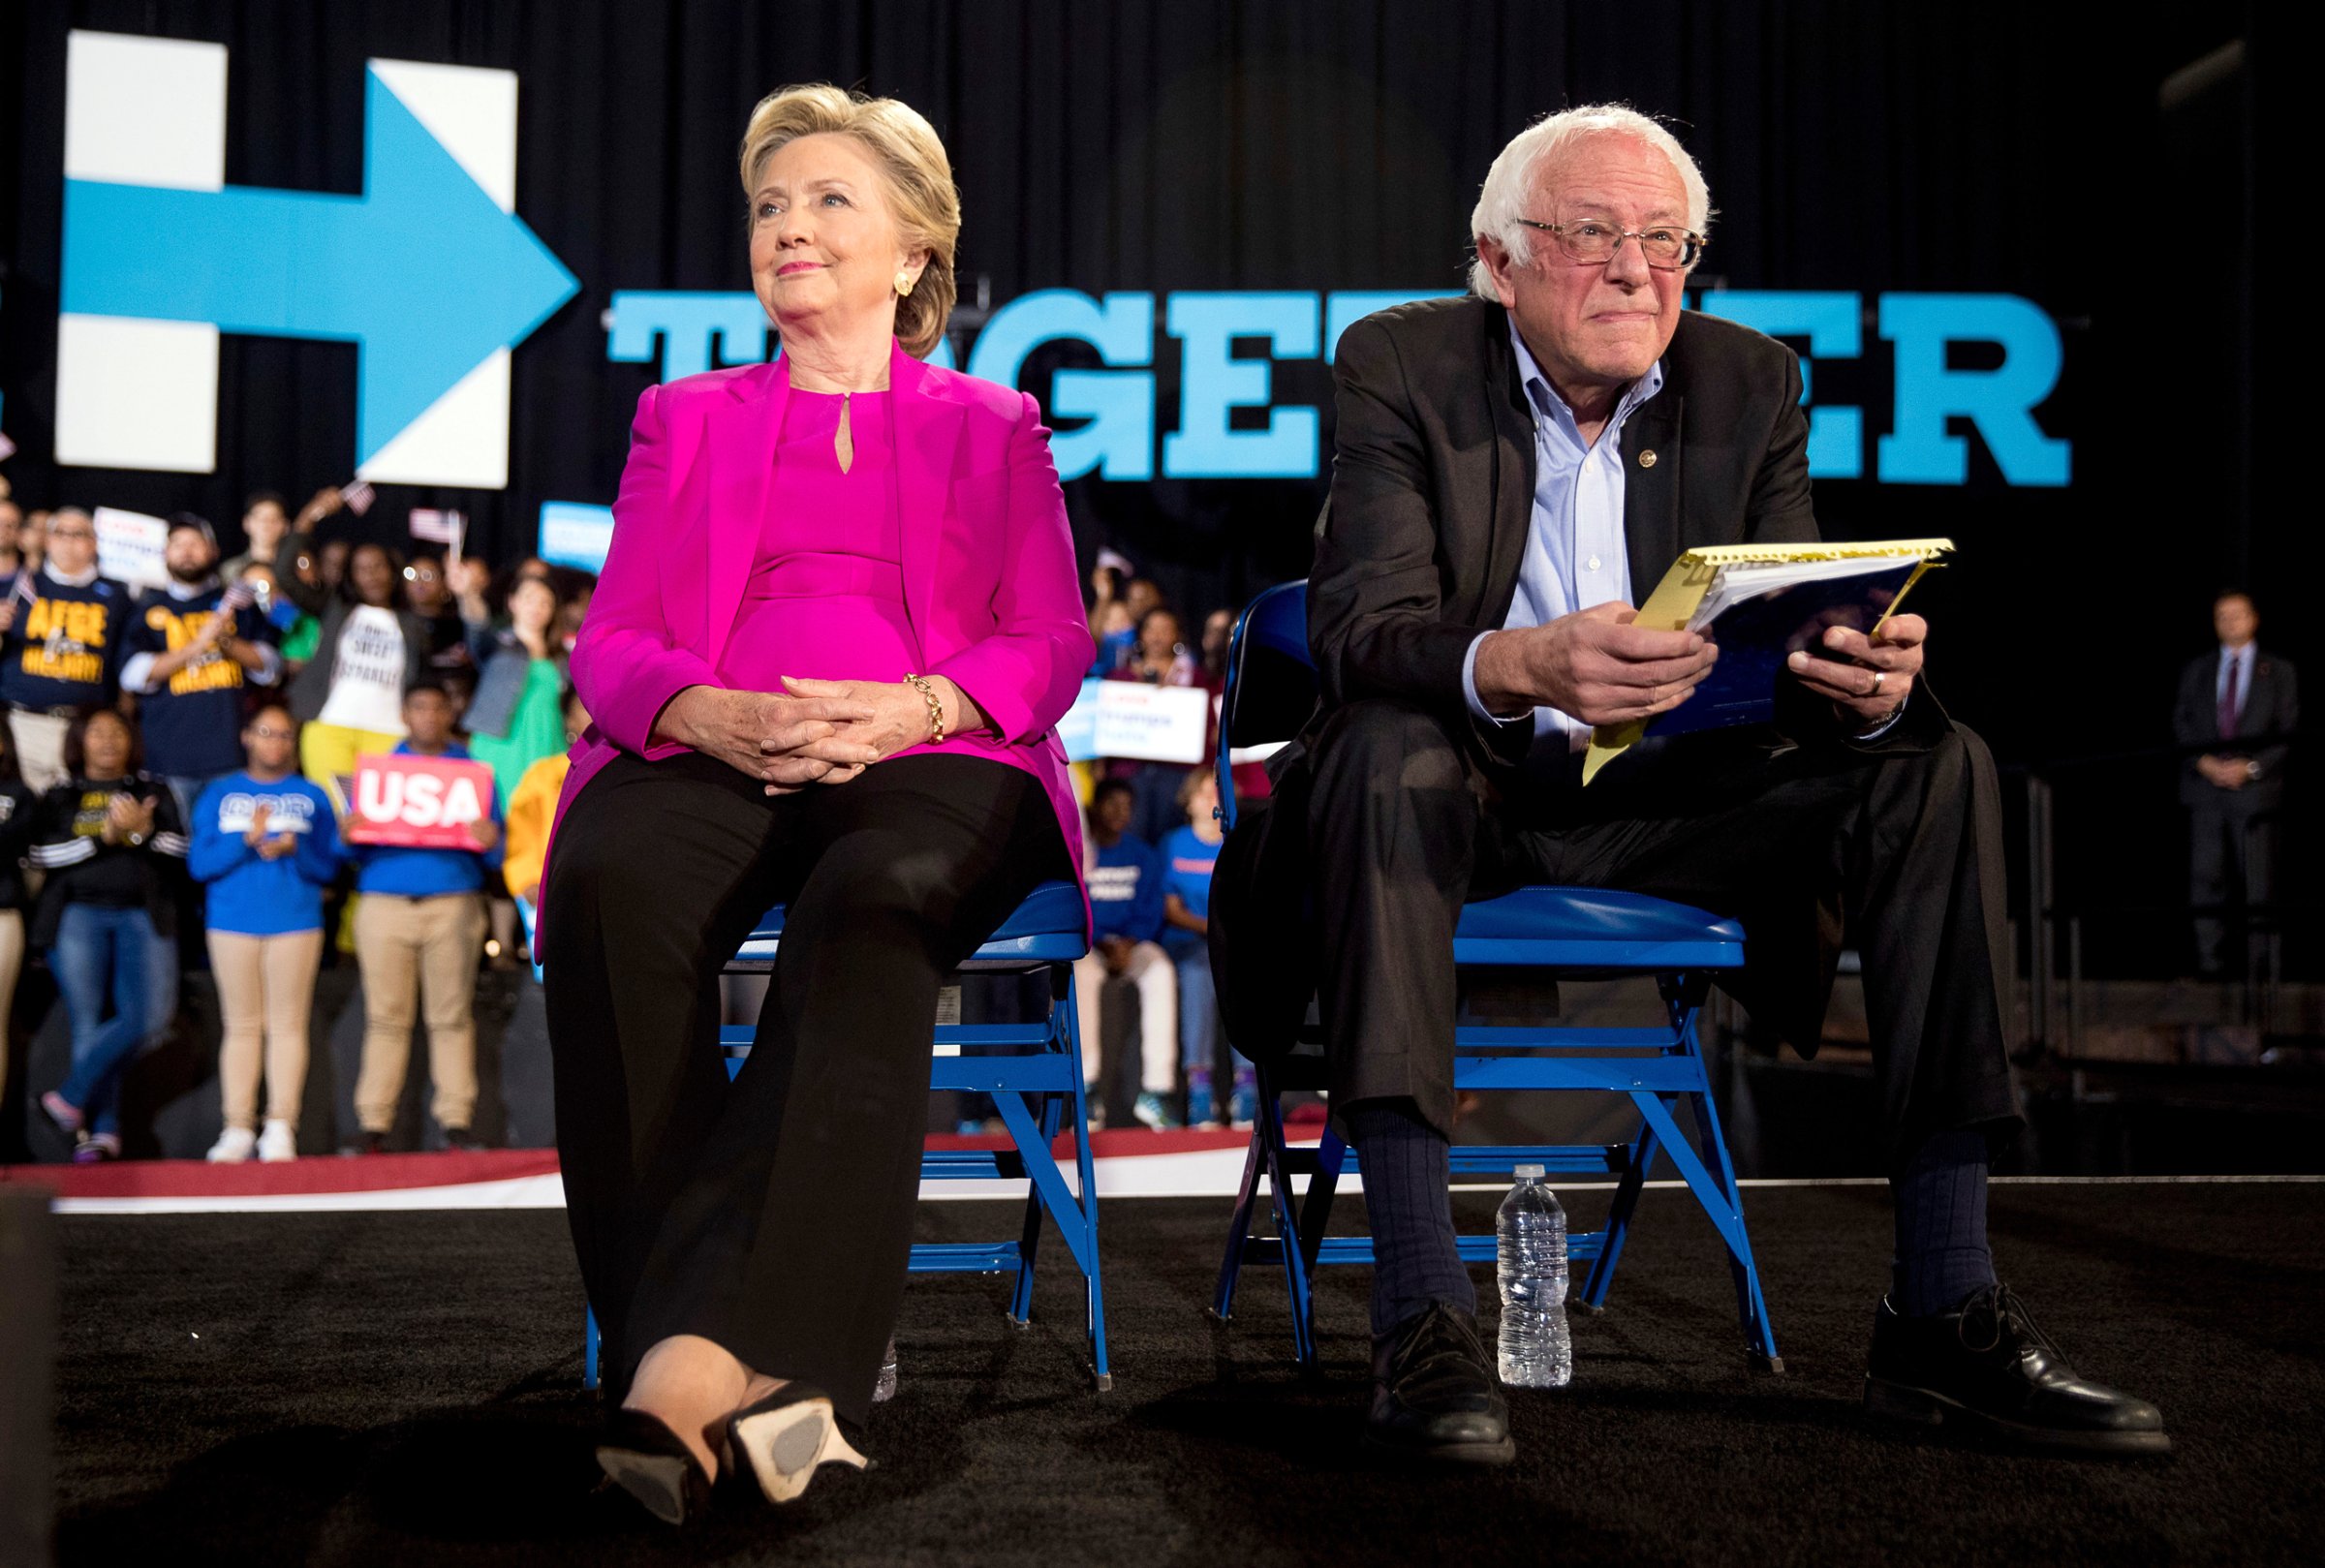 Democratic presidential candidate Hillary Clinton and Sen. Bernie Sanders, D-Vt., appear at a rally at Coastal Credit Union Music Park at Walnut Creek in Raleigh, N.C., Thursday, Nov. 3, 2016. (AP Photo/Andrew Harnik)